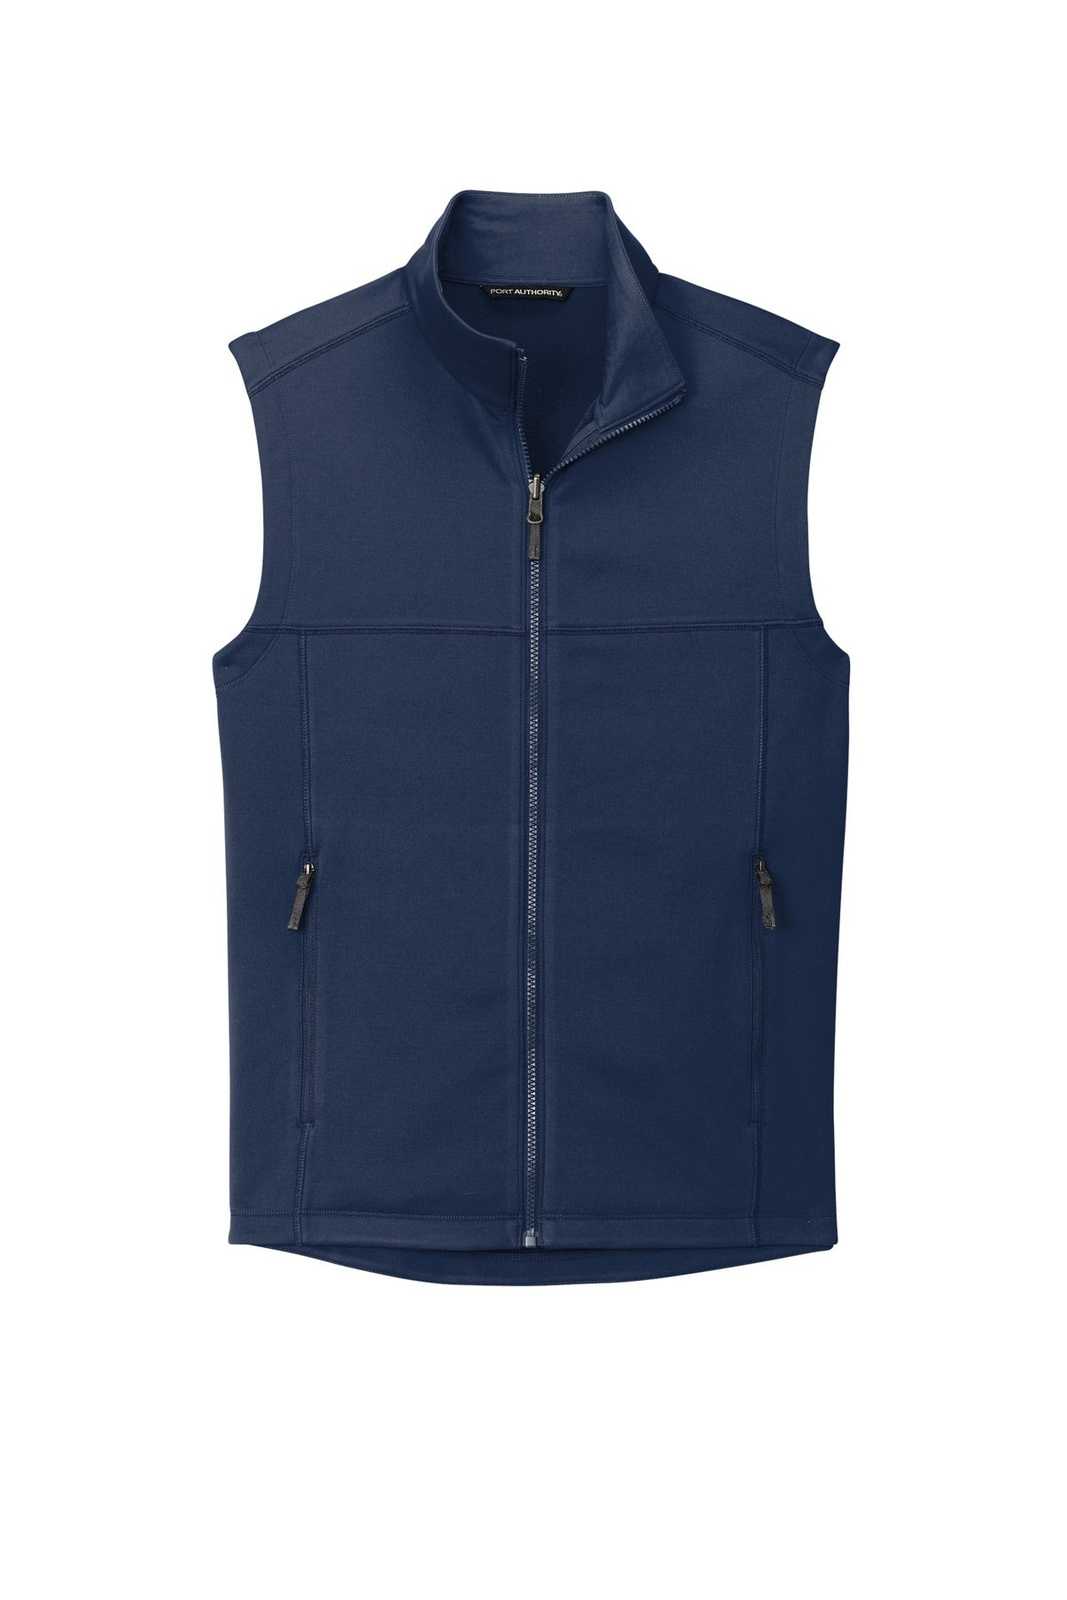 Port Authority F906 Collective Smooth Fleece Vest - River Blue Navy - HIT a Double - 2